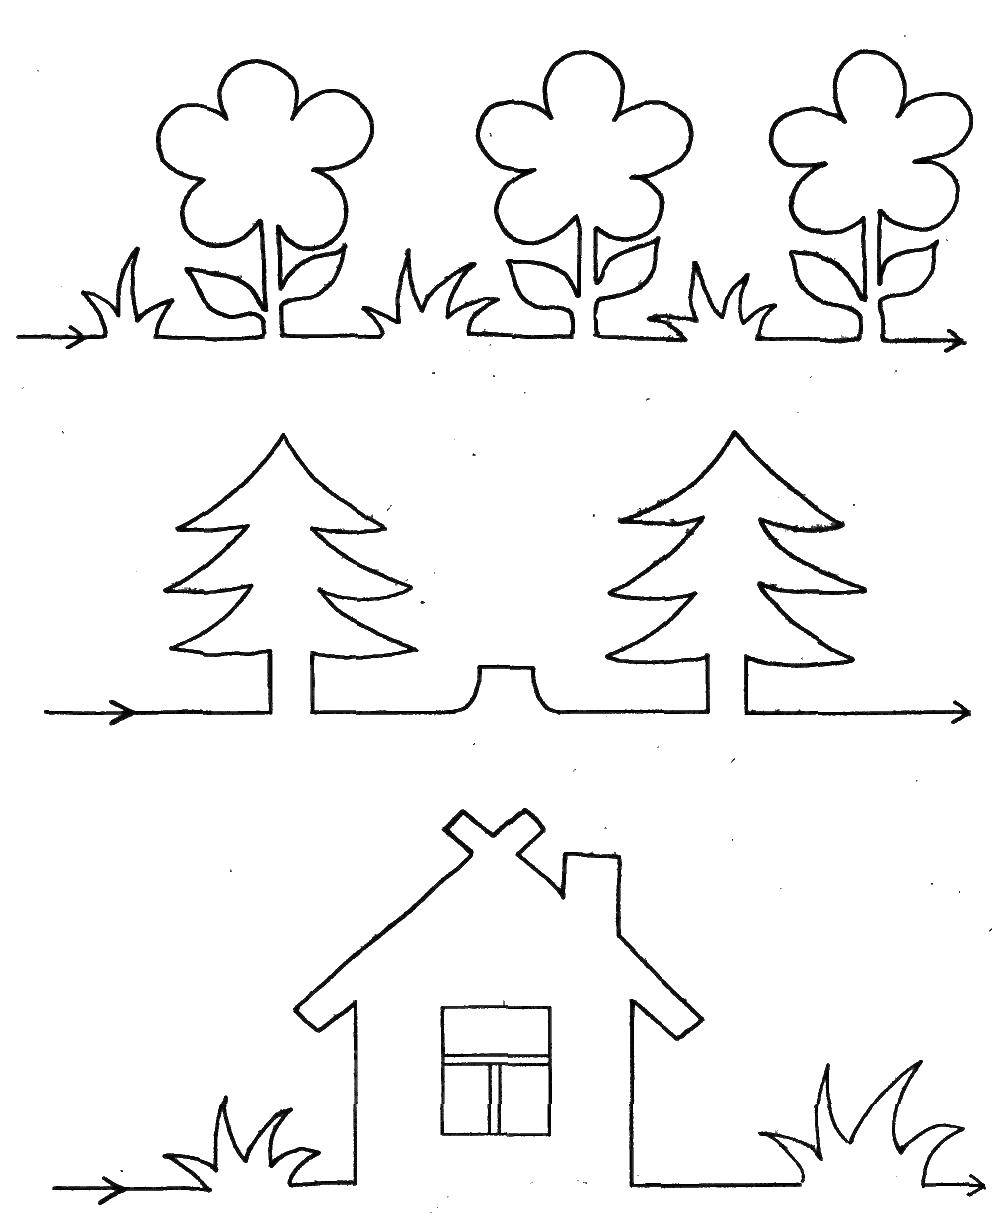 Coloring The house and the trees. Category fix on the model. Tags:  Doris, sample.